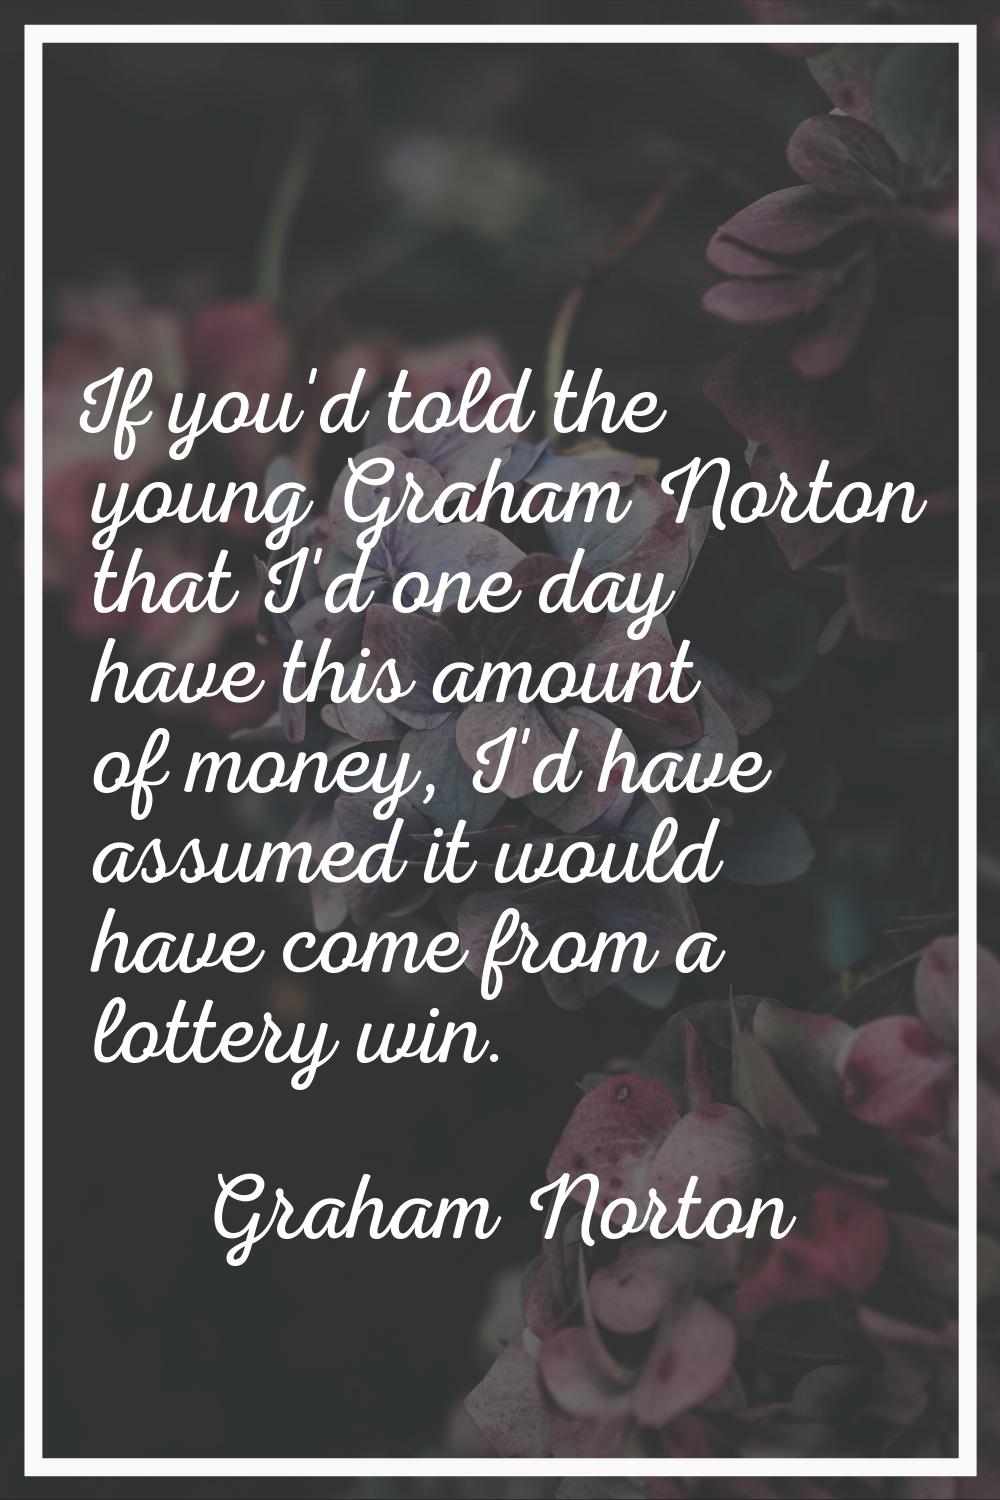 If you'd told the young Graham Norton that I'd one day have this amount of money, I'd have assumed 